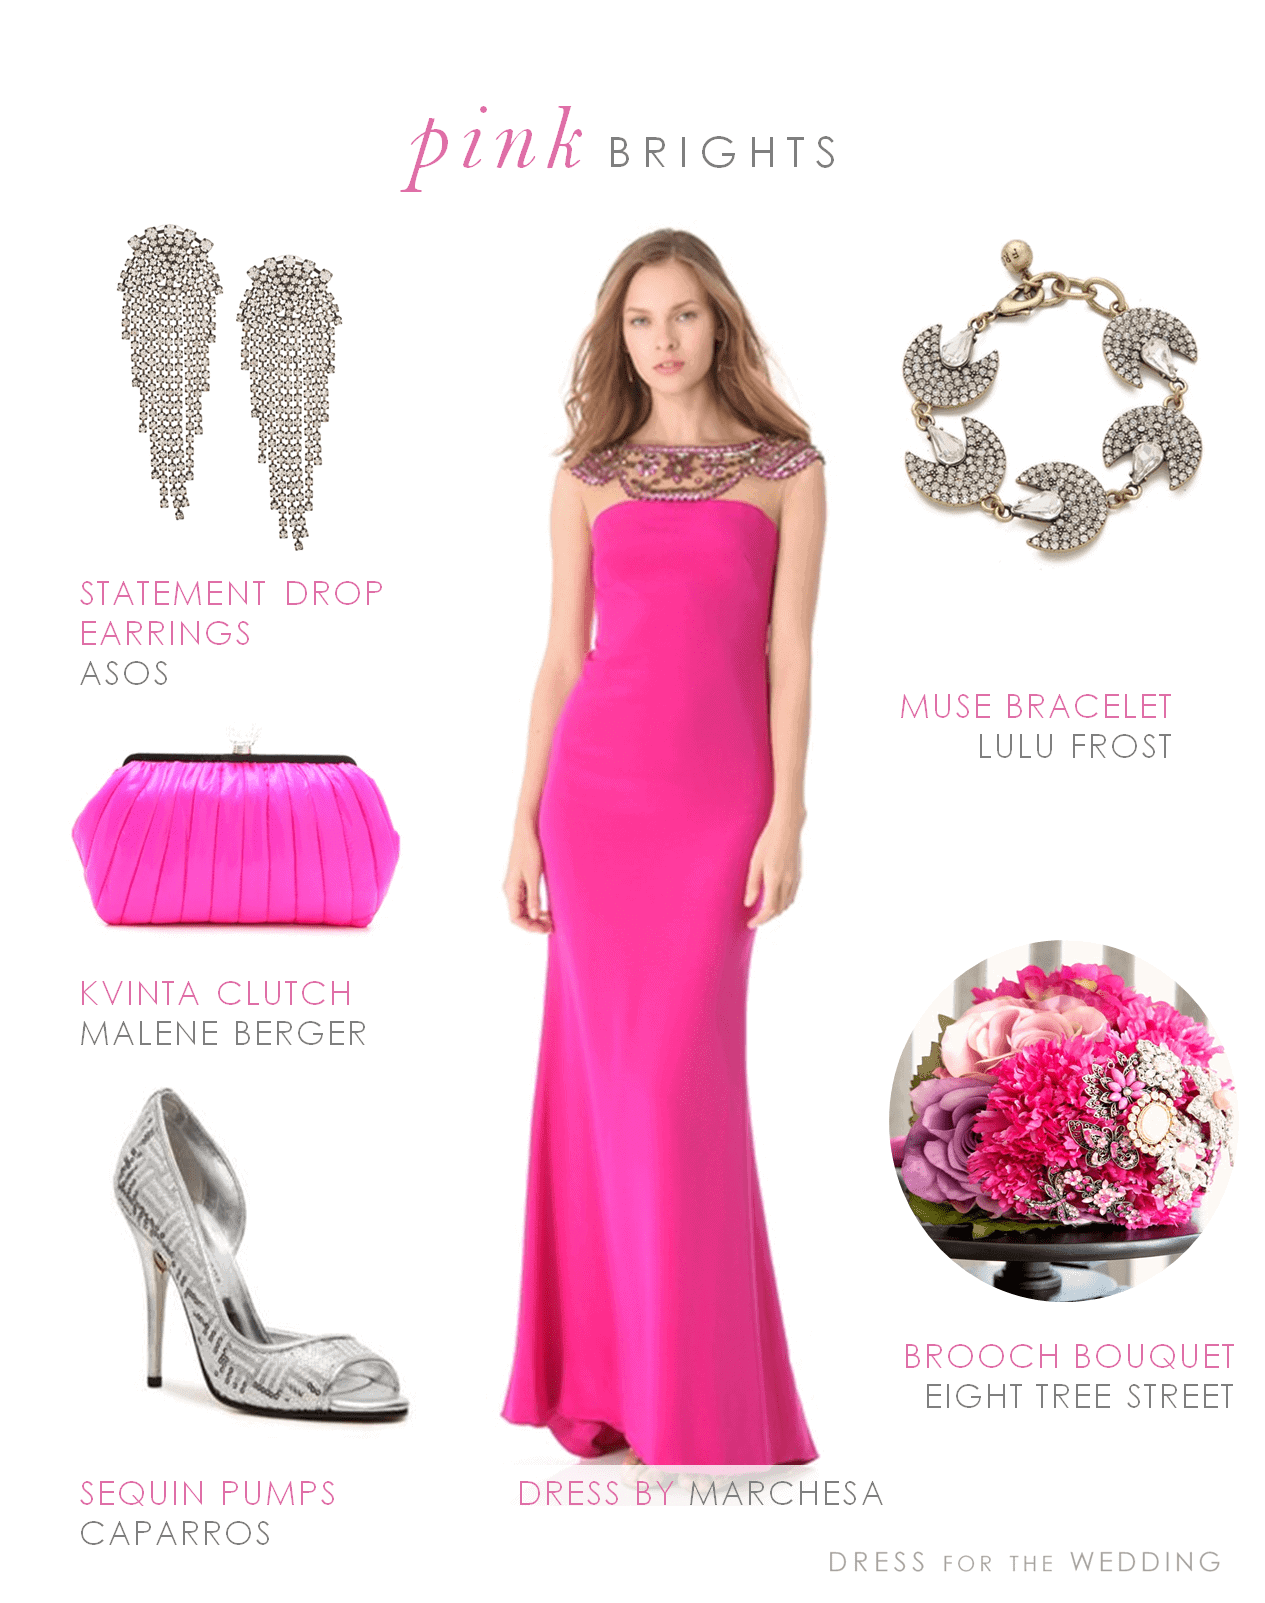 Hot Pink Formal Gown Inspired by EightTreeStreet